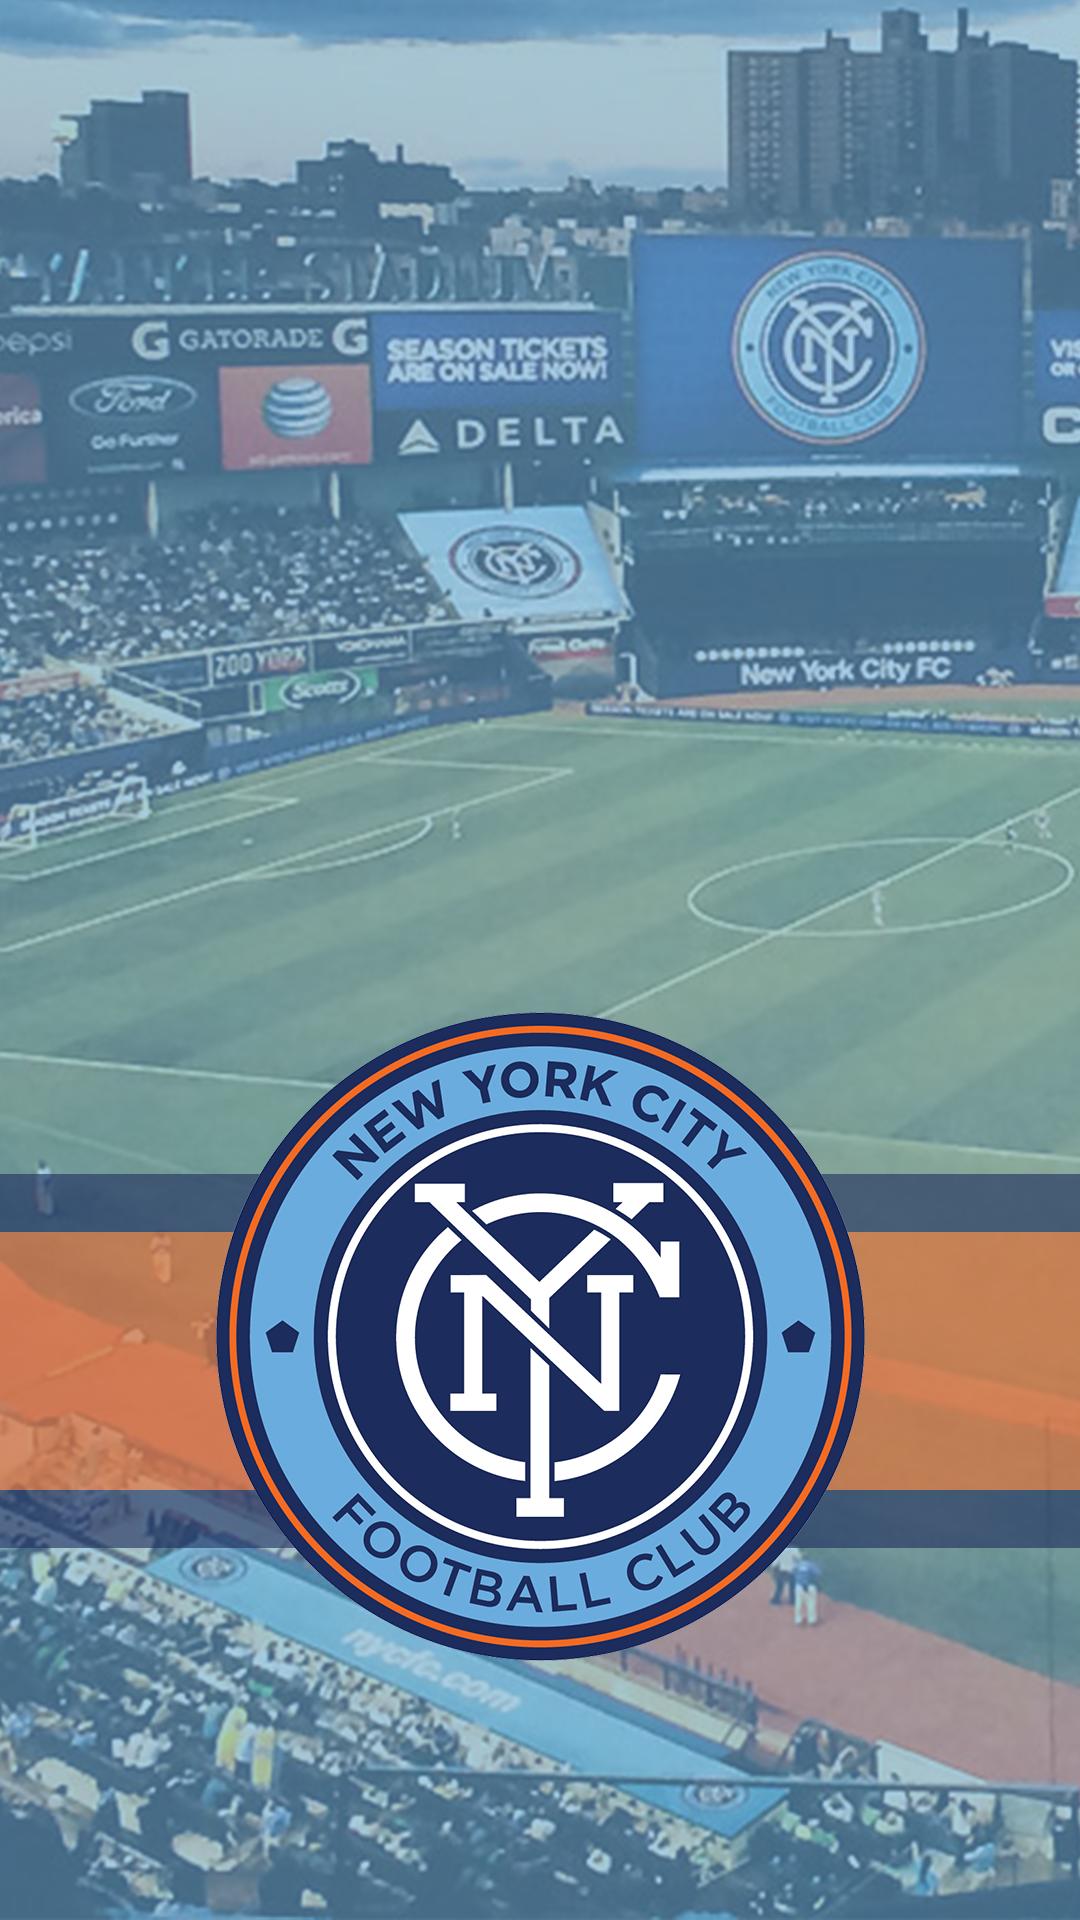 Inspired By A Post Over At R Baseball, I Made A Few NYCFC Phone Wallpaper